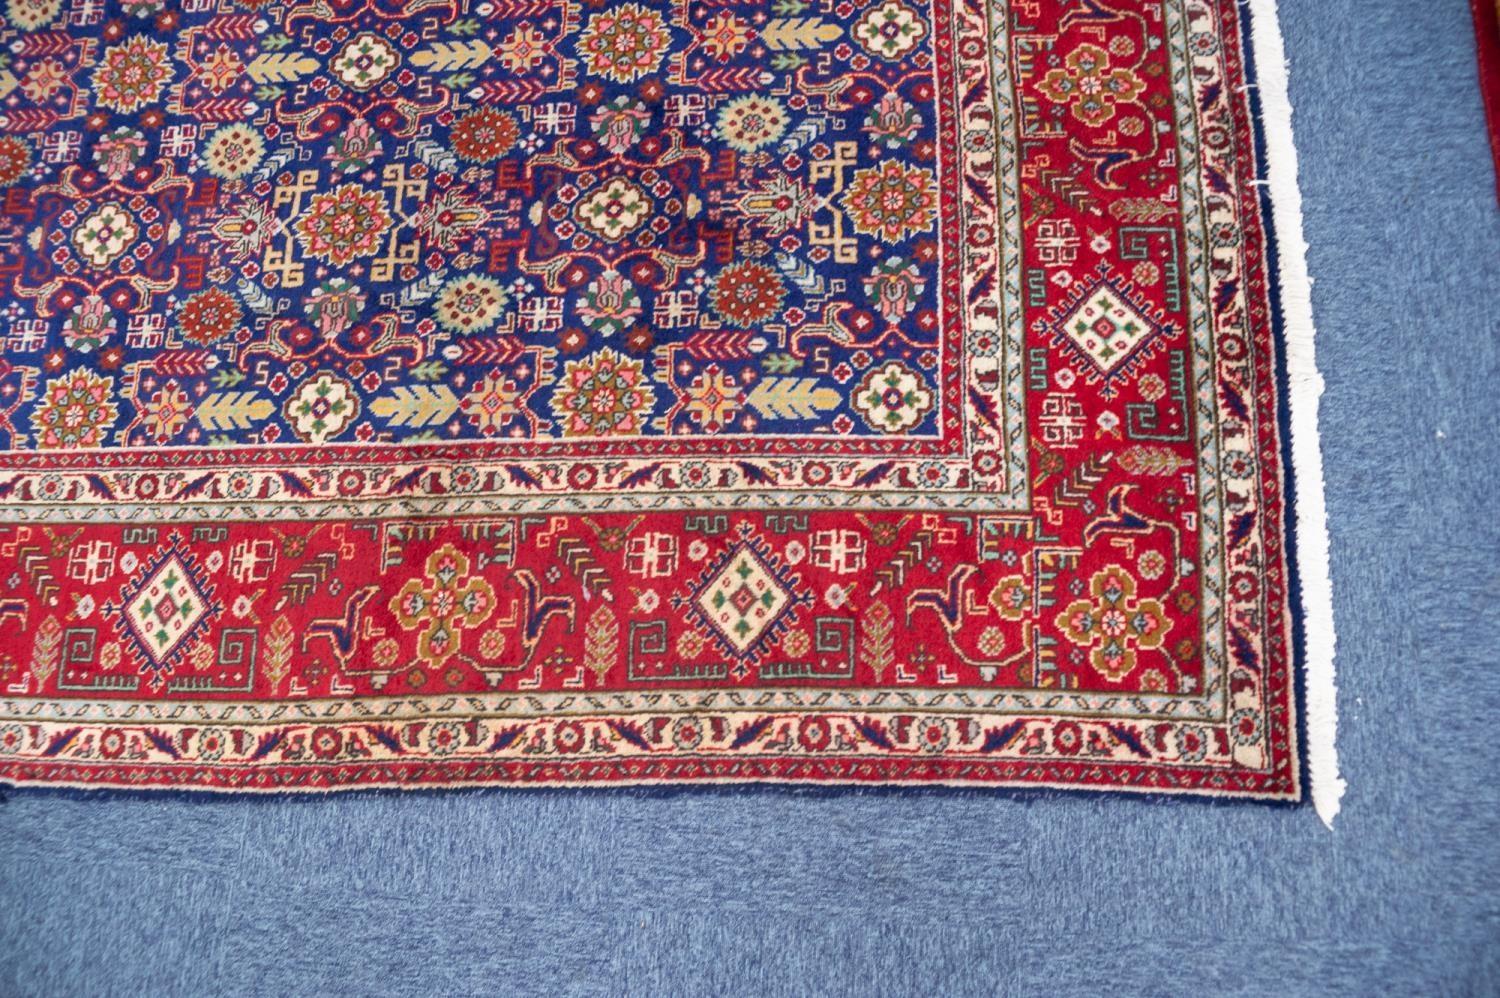 TABRIZ PERSIAN CARPET with all-over repeat formal floral, leaf and ram's horn patetrn on a dark blue - Image 2 of 3